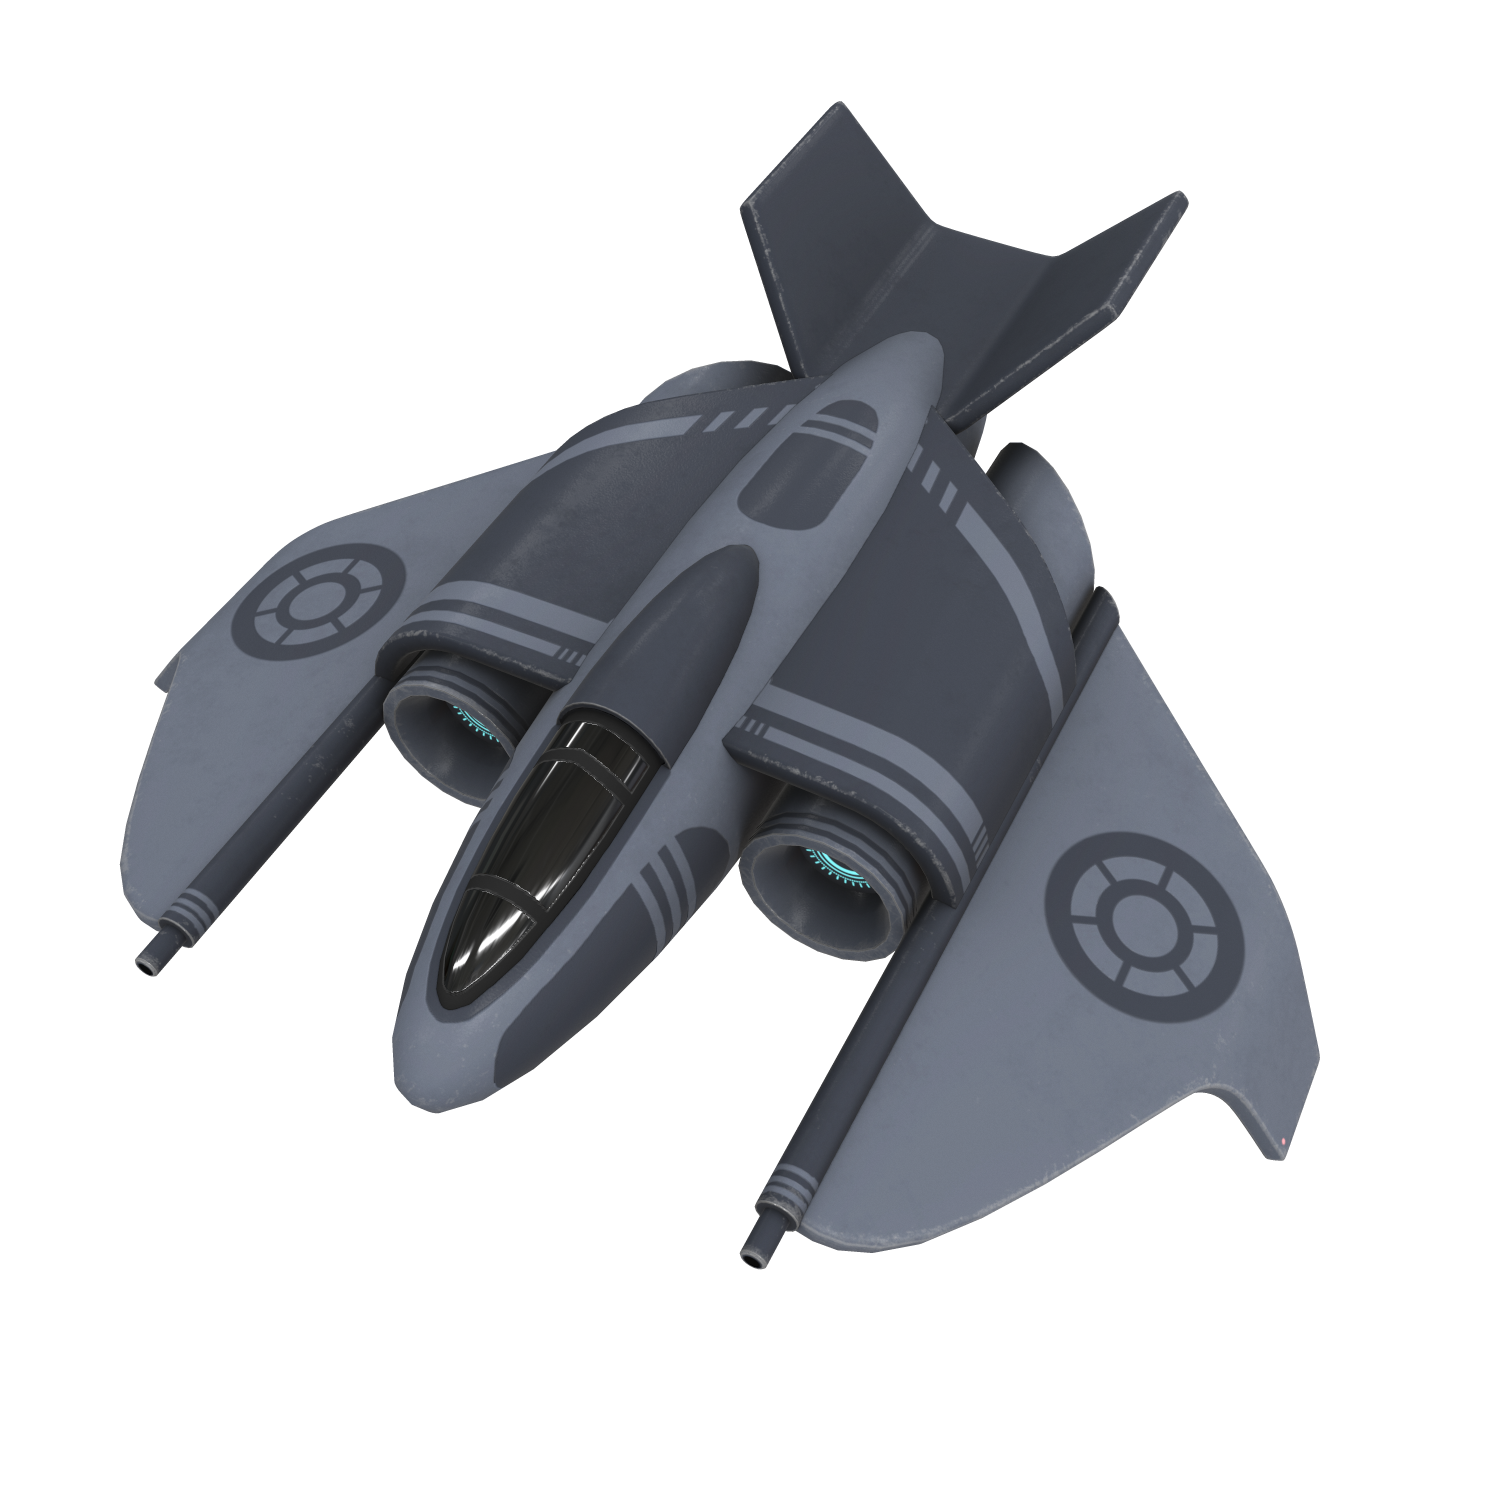 Cranetop friendly spaceship from play-to-earn game Operation Dawn